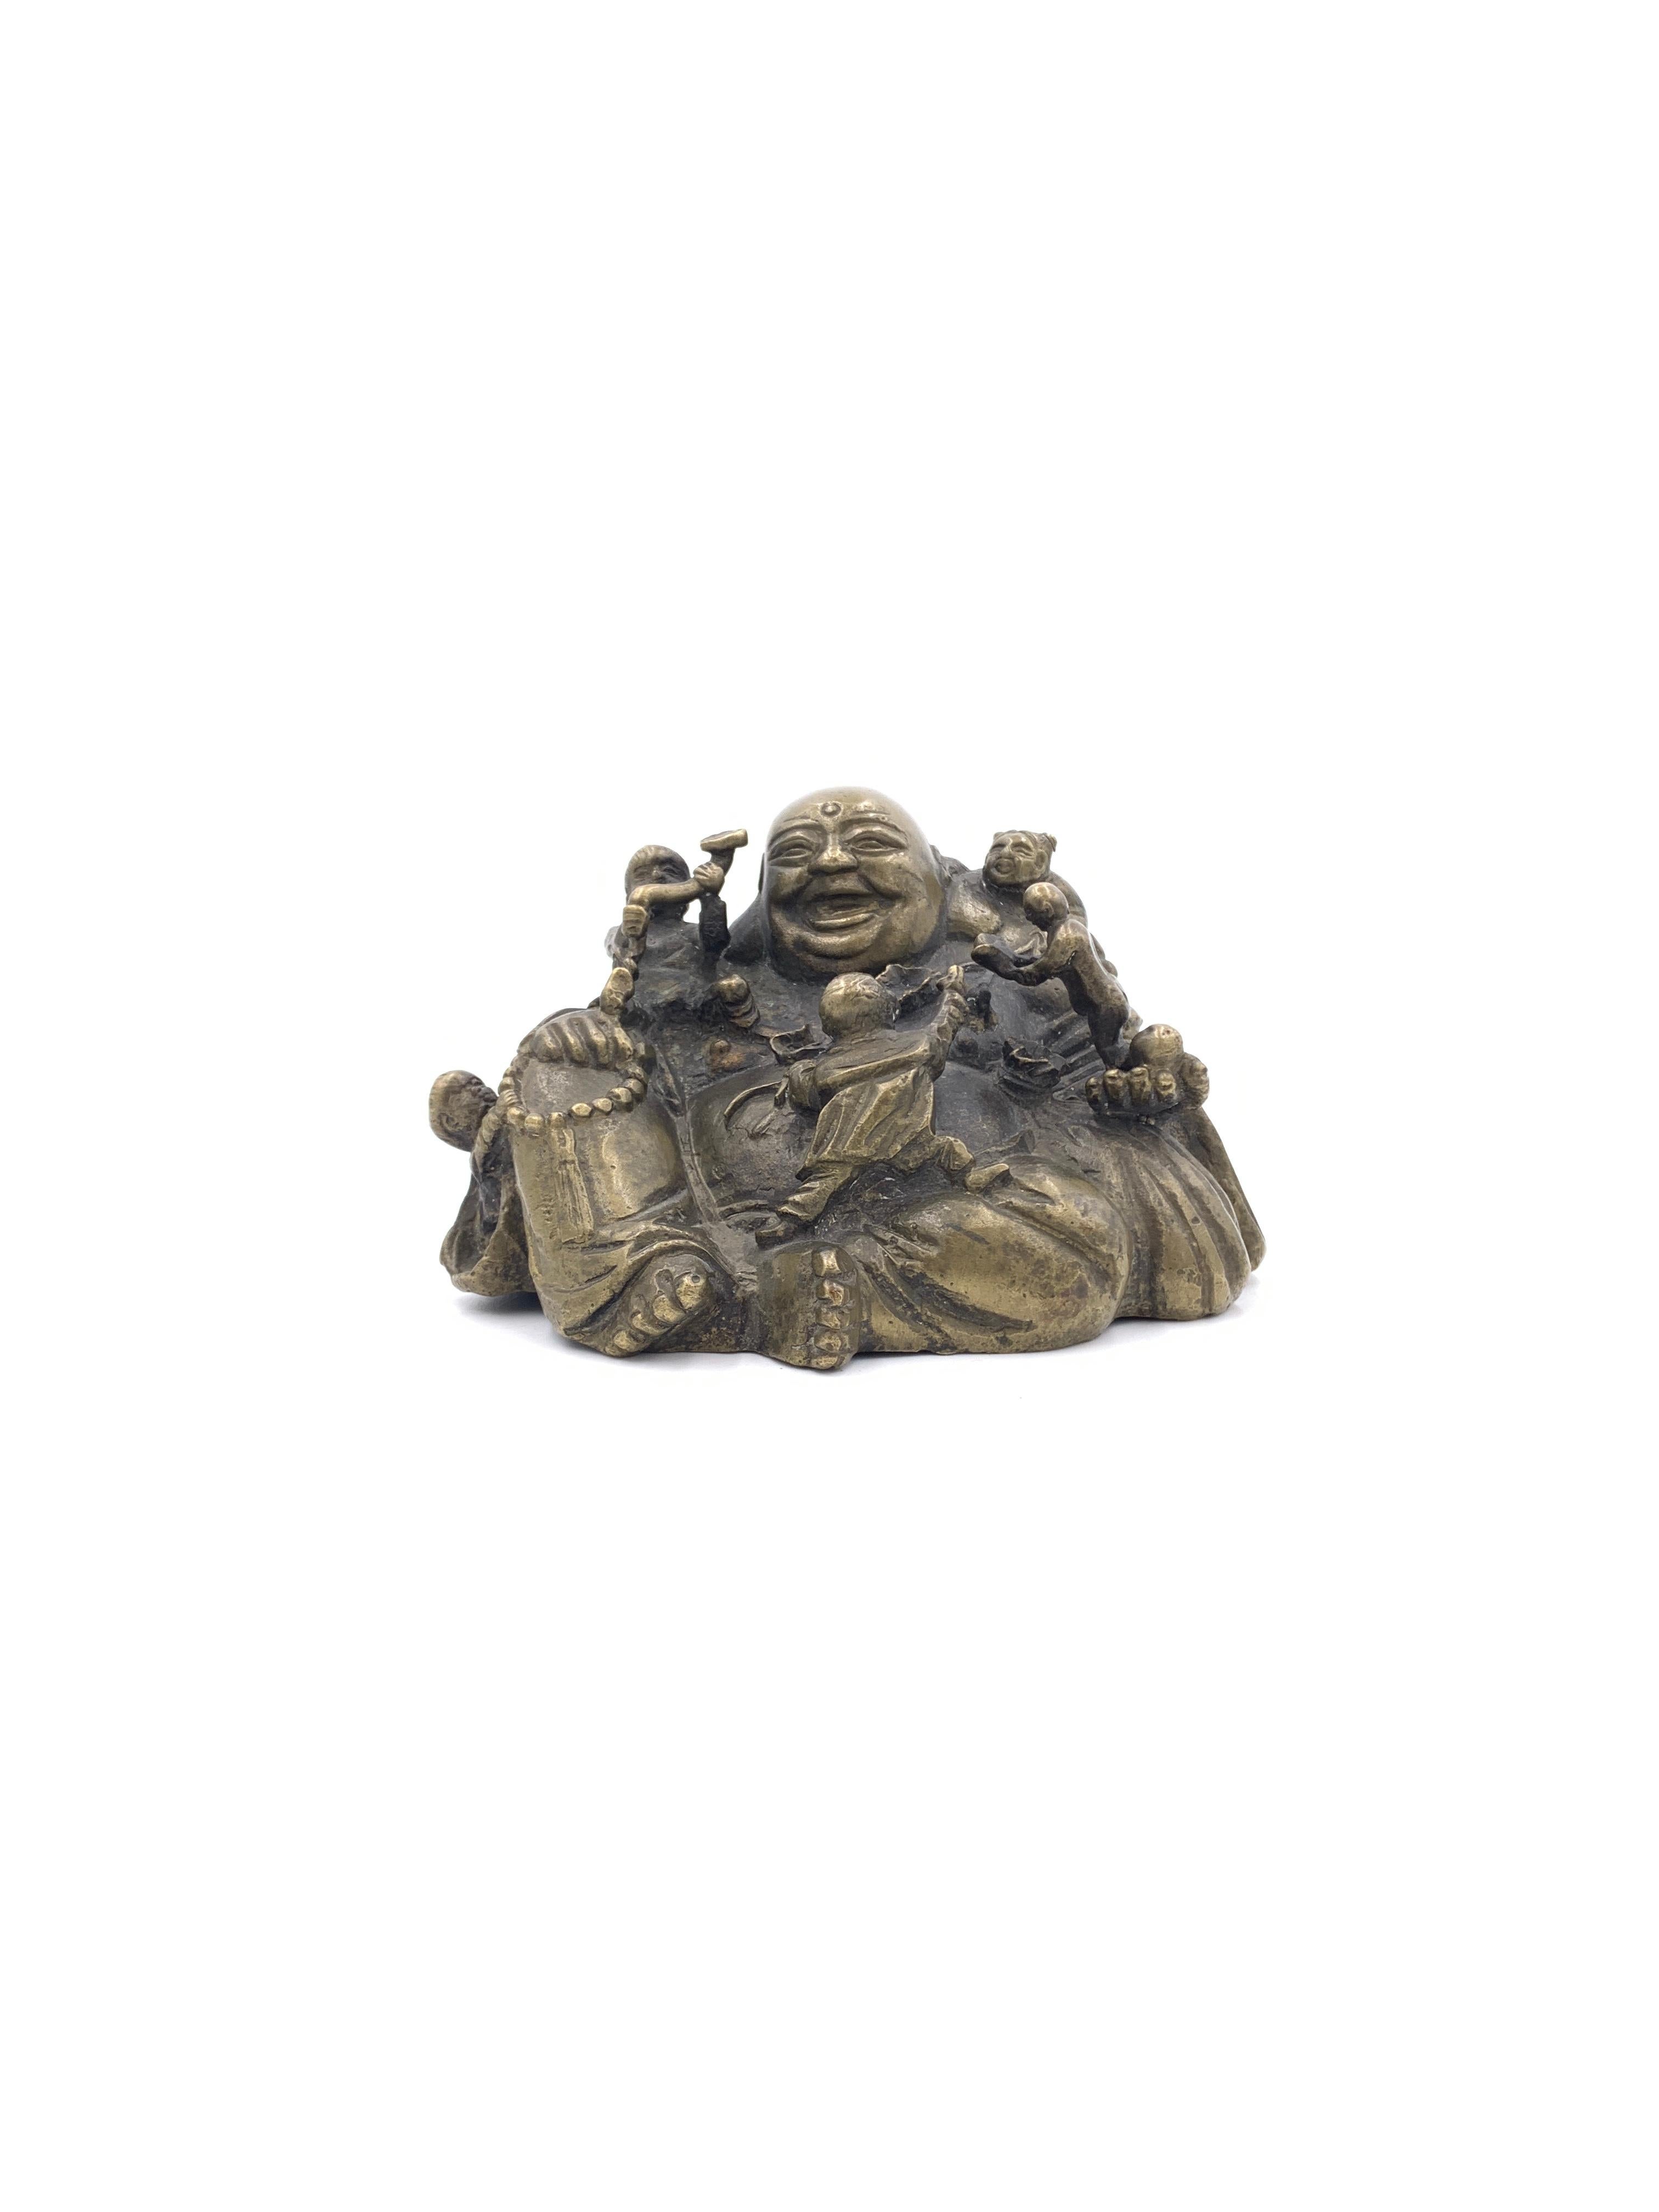 Unknown Collection of Five Metal Laughing Buddha Statue For Sale